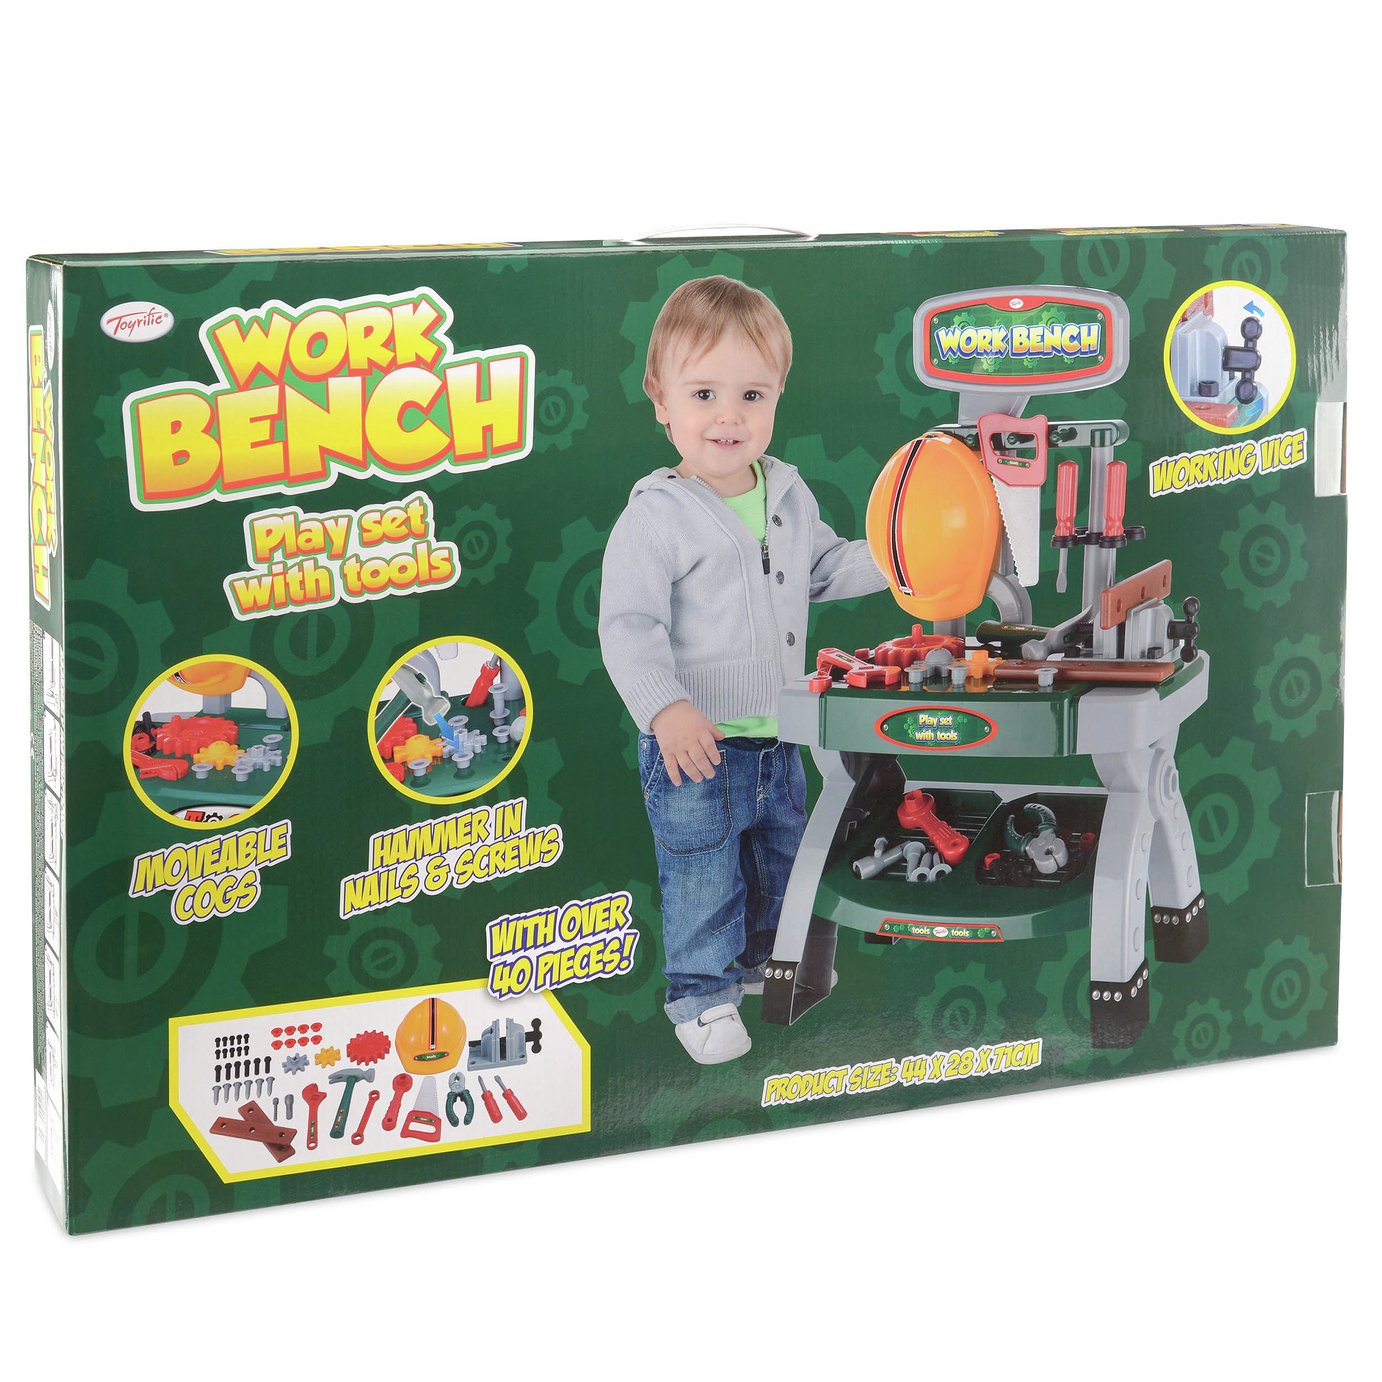 Work Bench with Tools Toy Review